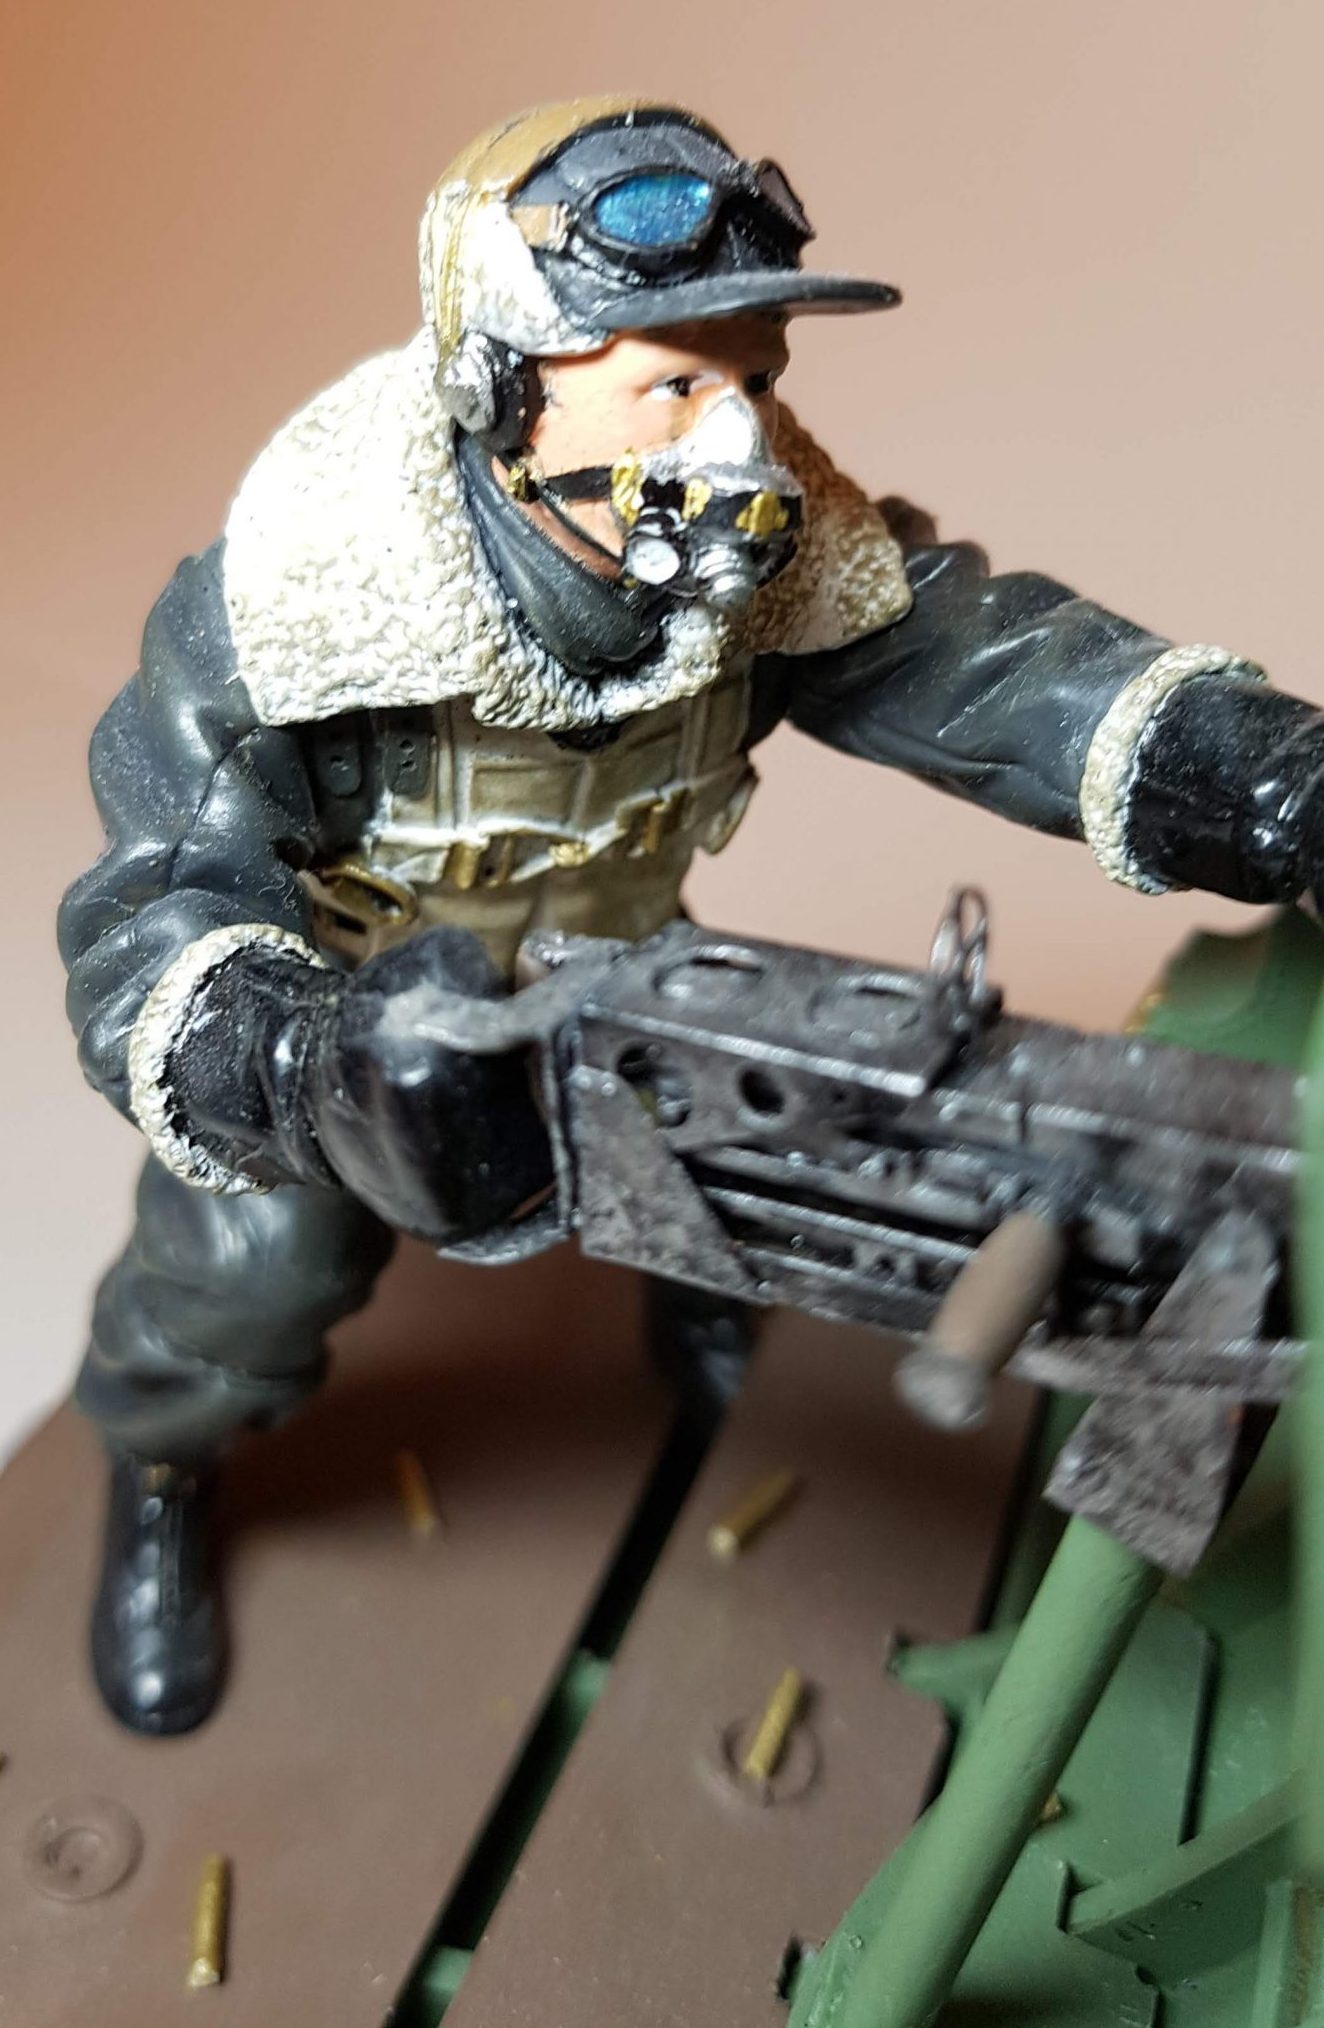 Model of Bandits! 2 O'Clock B17 Waist Gunner (WW2) - View 5 - 120mm Scale - Built By Wright Built - Verlinden Productions